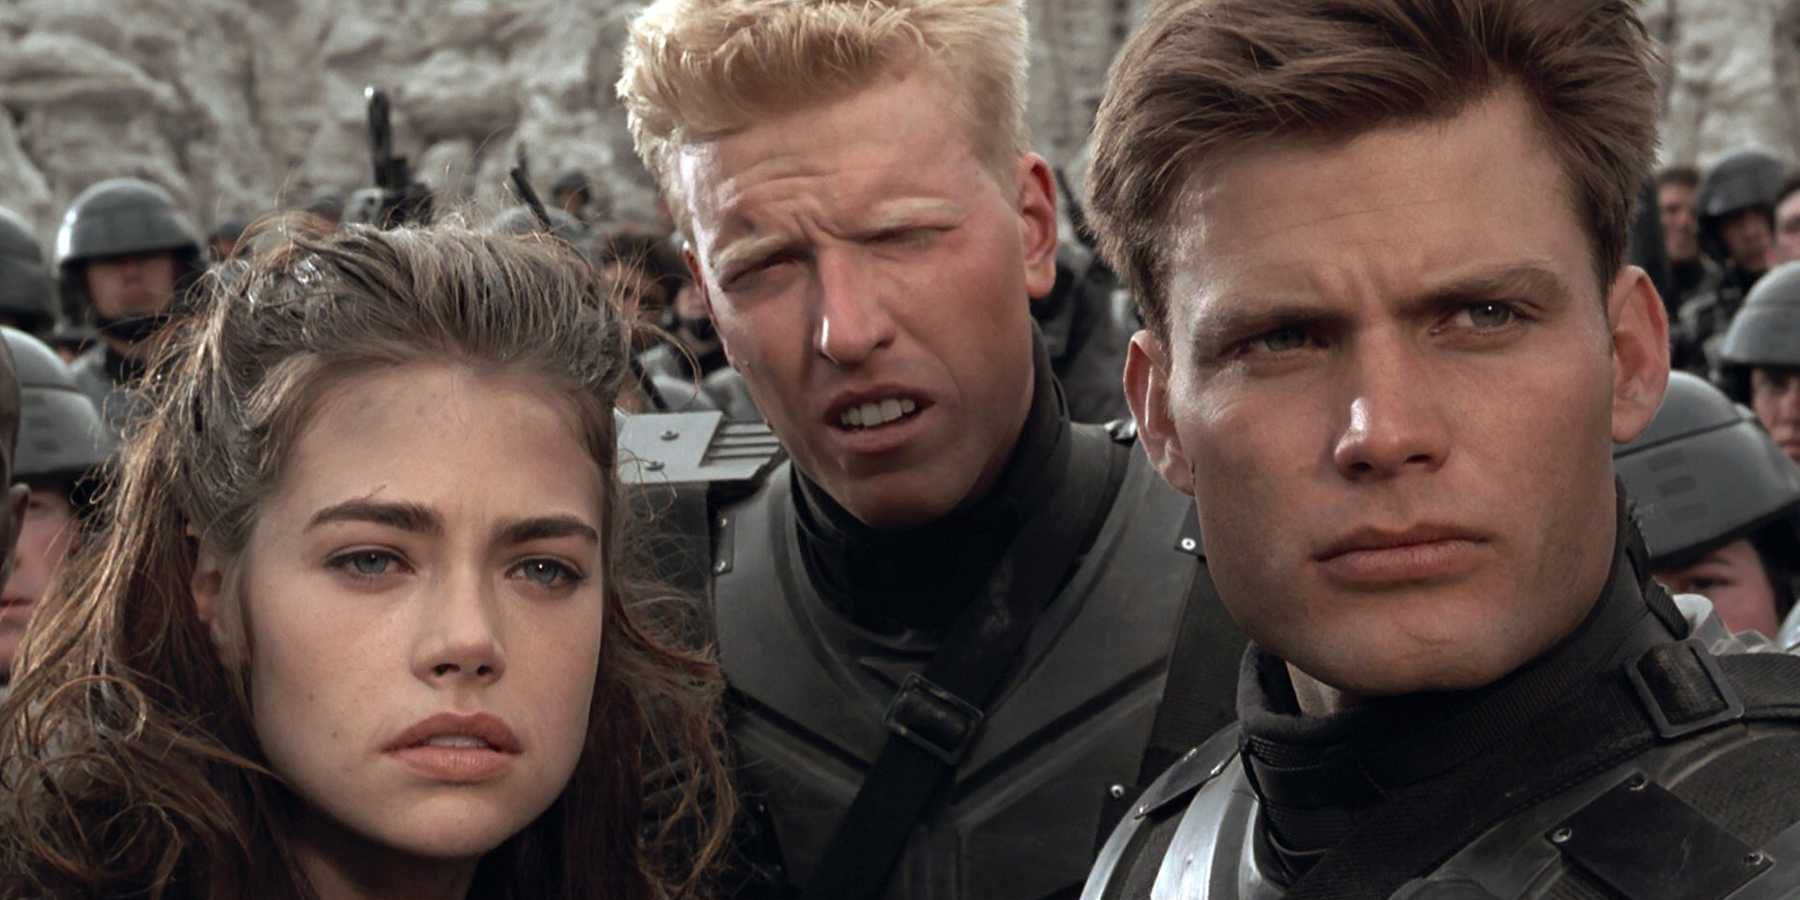 Starship Troopers' scowling soldiers.